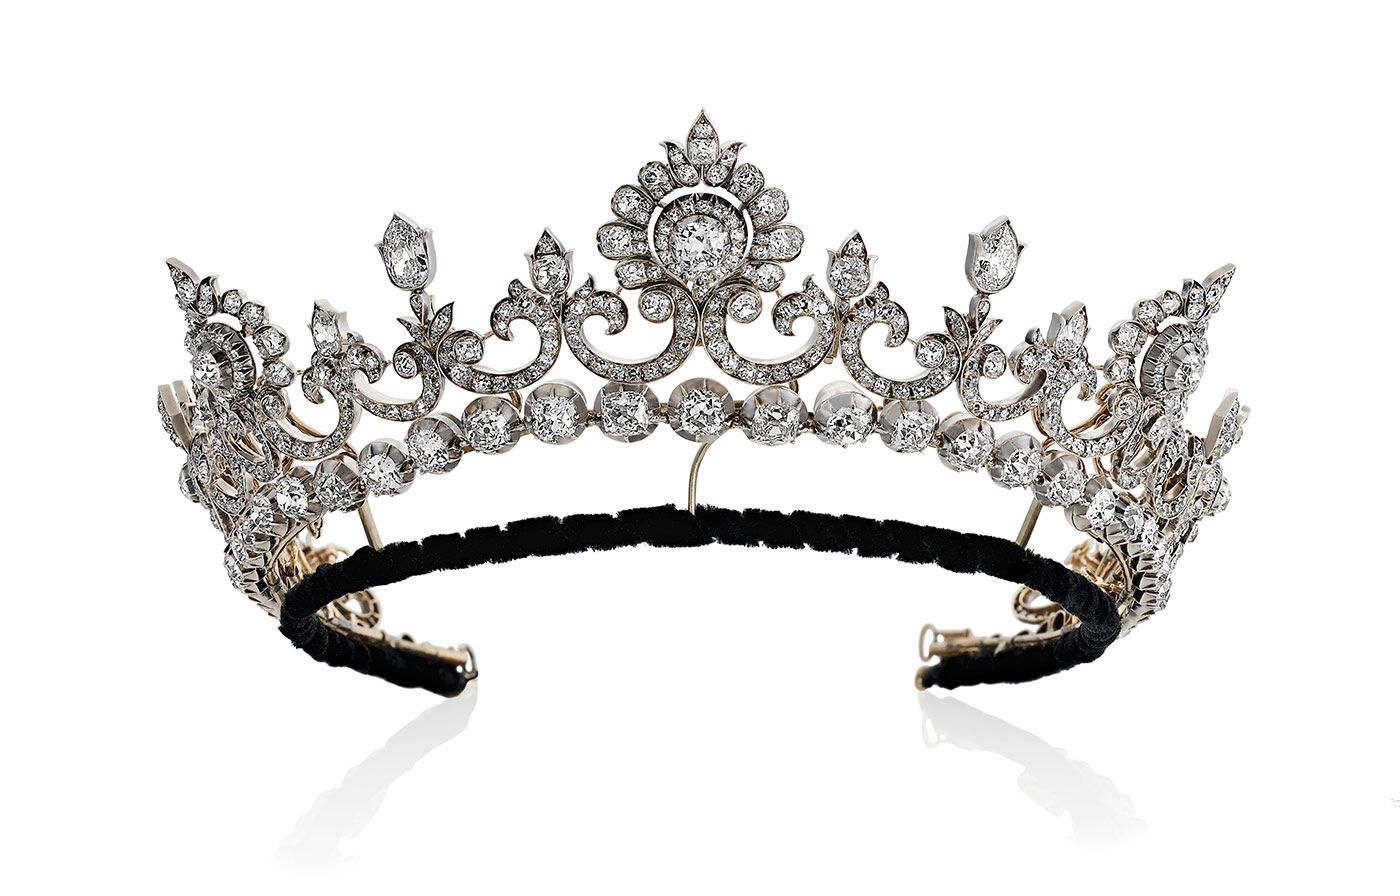 Hancocks diamond-set tiara worn by Marjorie Paget, the Marchioness of Anglesey, to the coronation of George VI in 1937